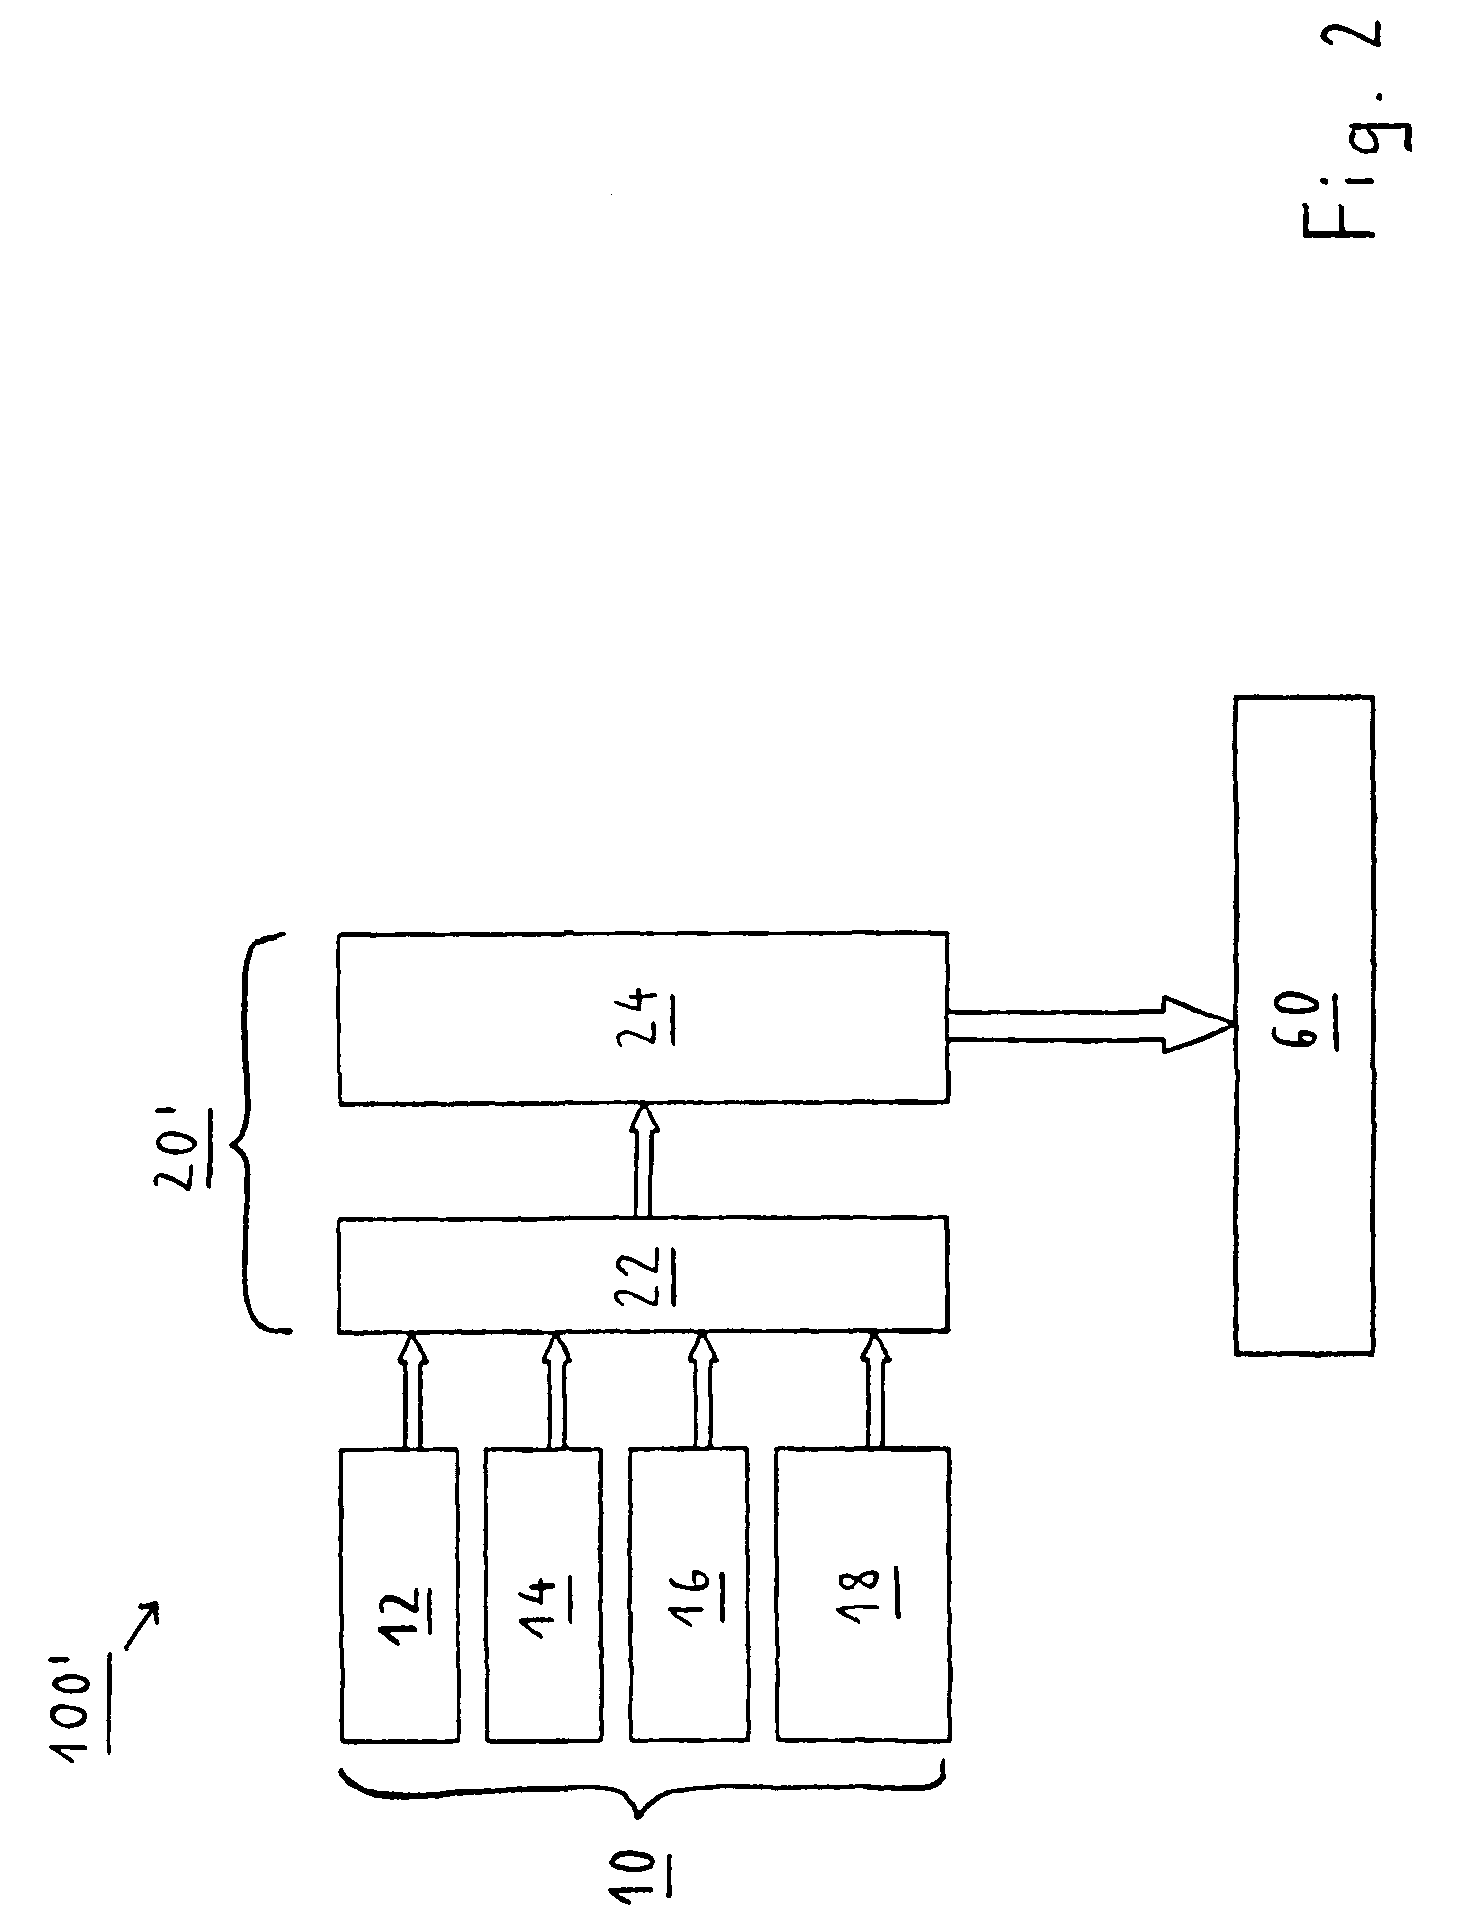 Safety system for a means of transportation and a method relating to the same